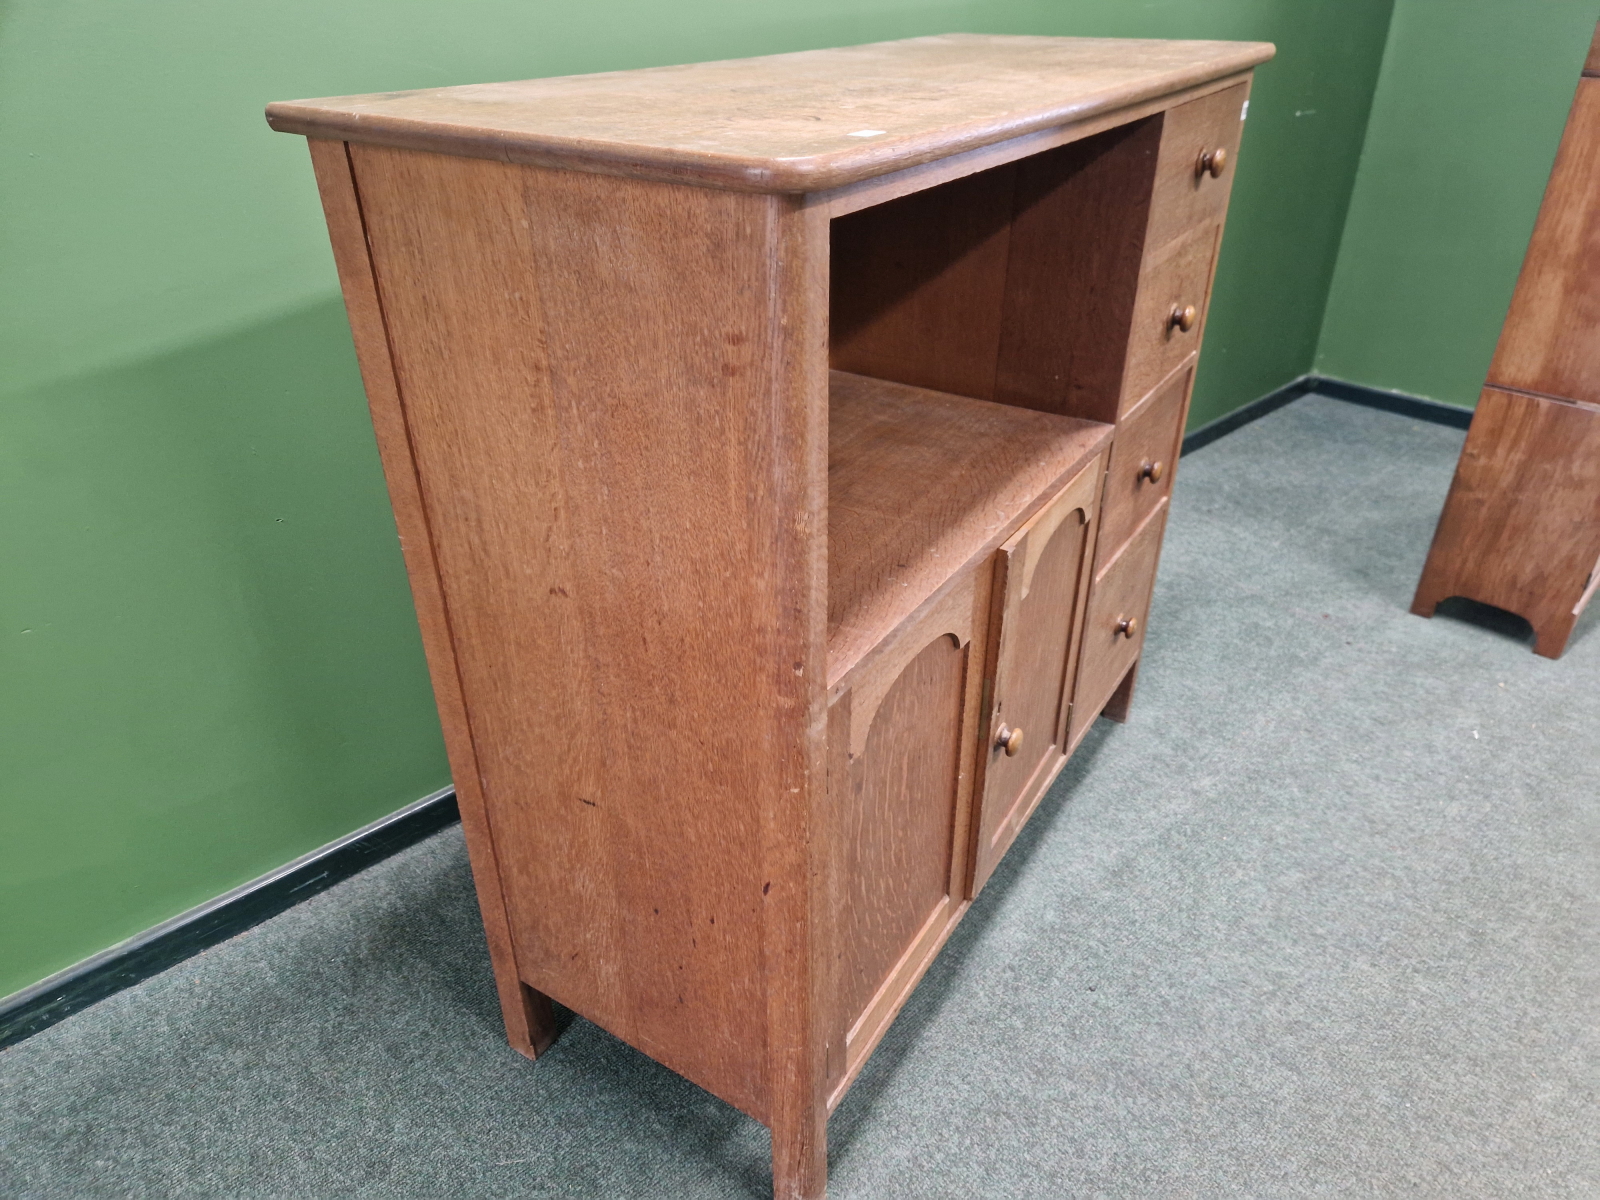 AN ARTS AND CRAFTS STYLE OAK SIDE CABINET IN THE MANNER OF HEALS. - Image 3 of 6